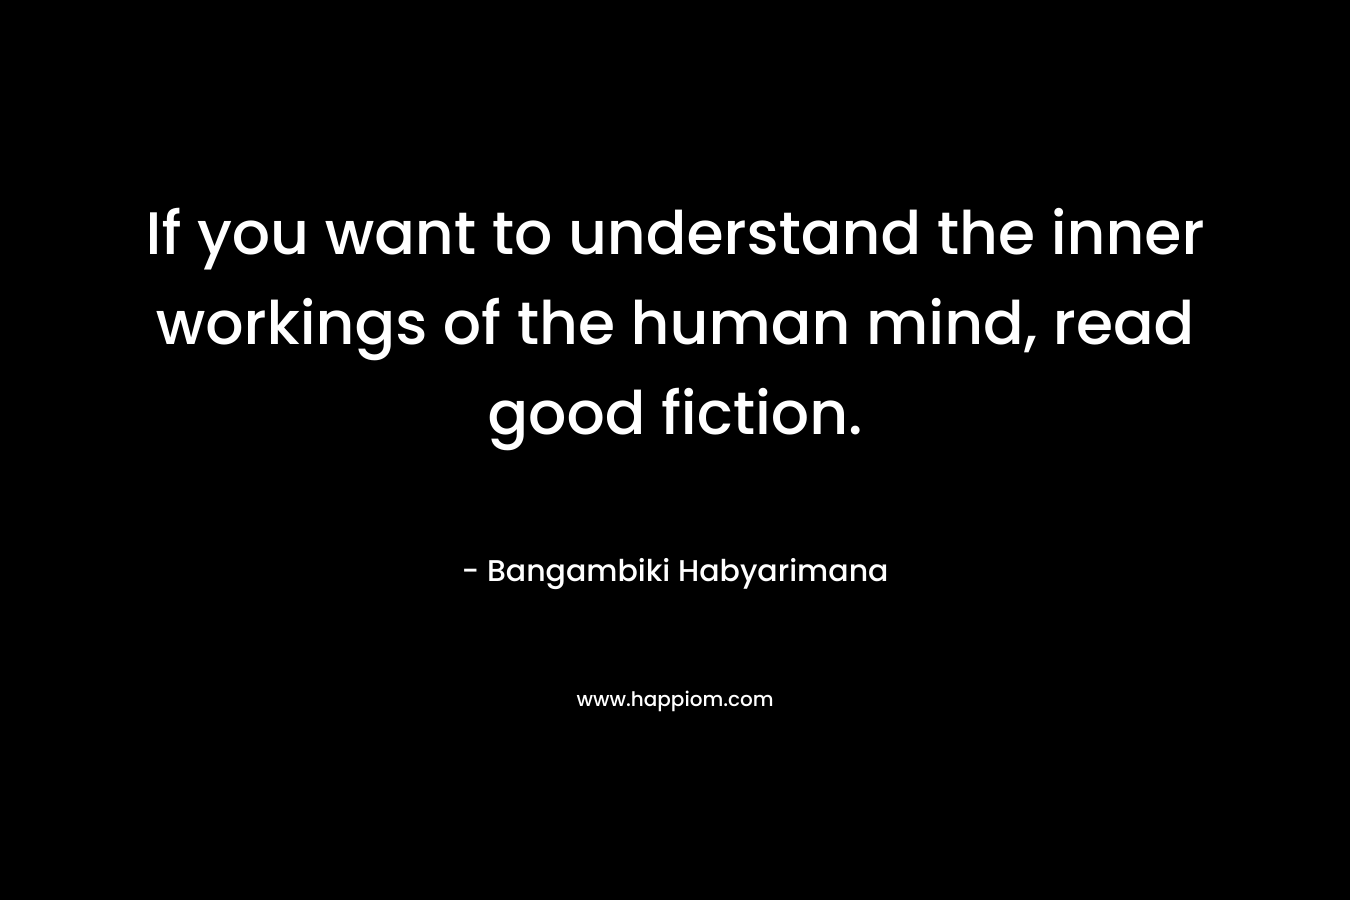 If you want to understand the inner workings of the human mind, read good fiction.